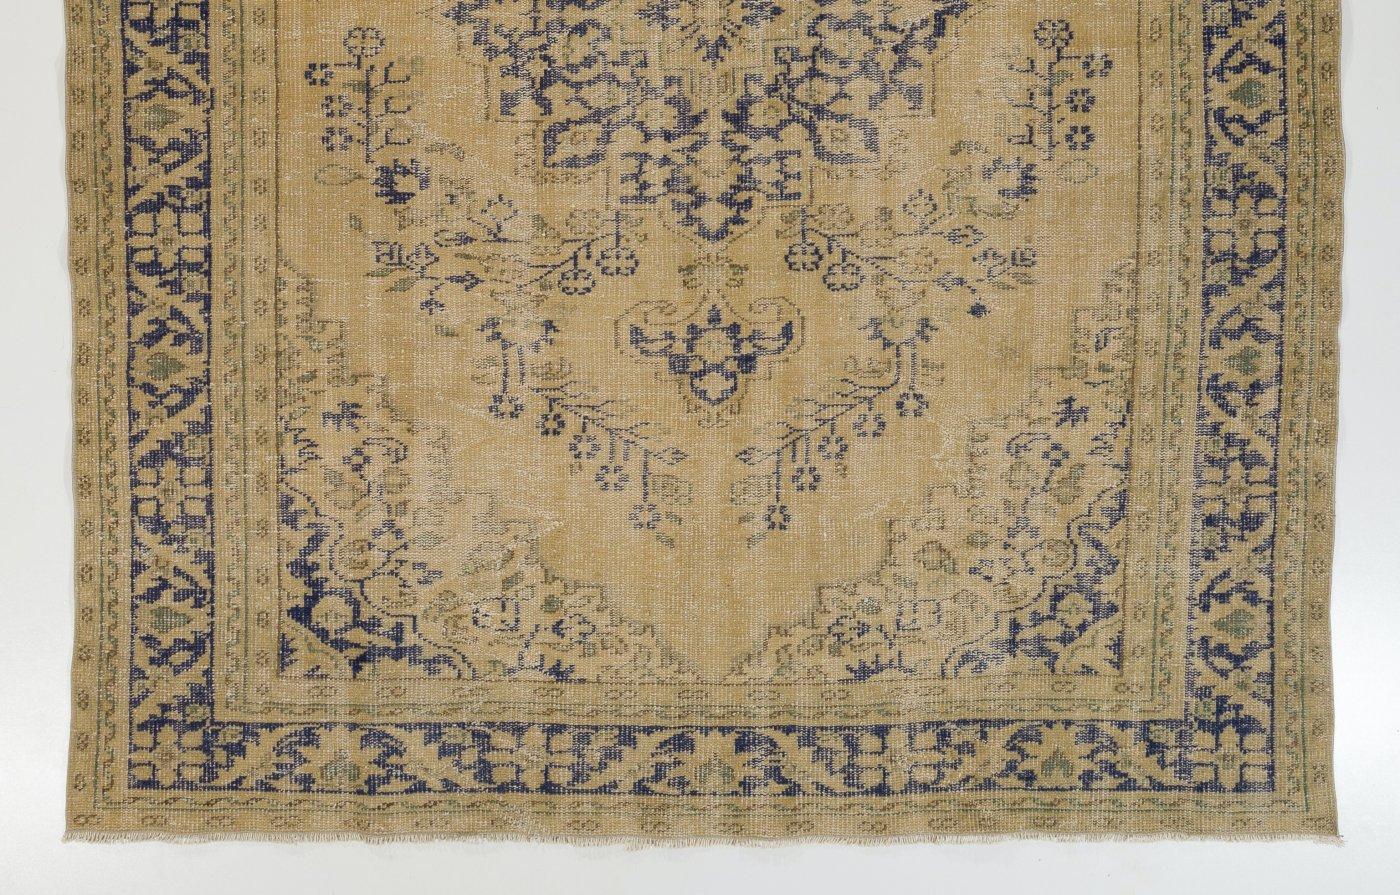 Hand-Knotted 7.3x9.5 Ft Vintage Turkish Oushak Area Rug in Beige and Navy Blue colors.  For Sale